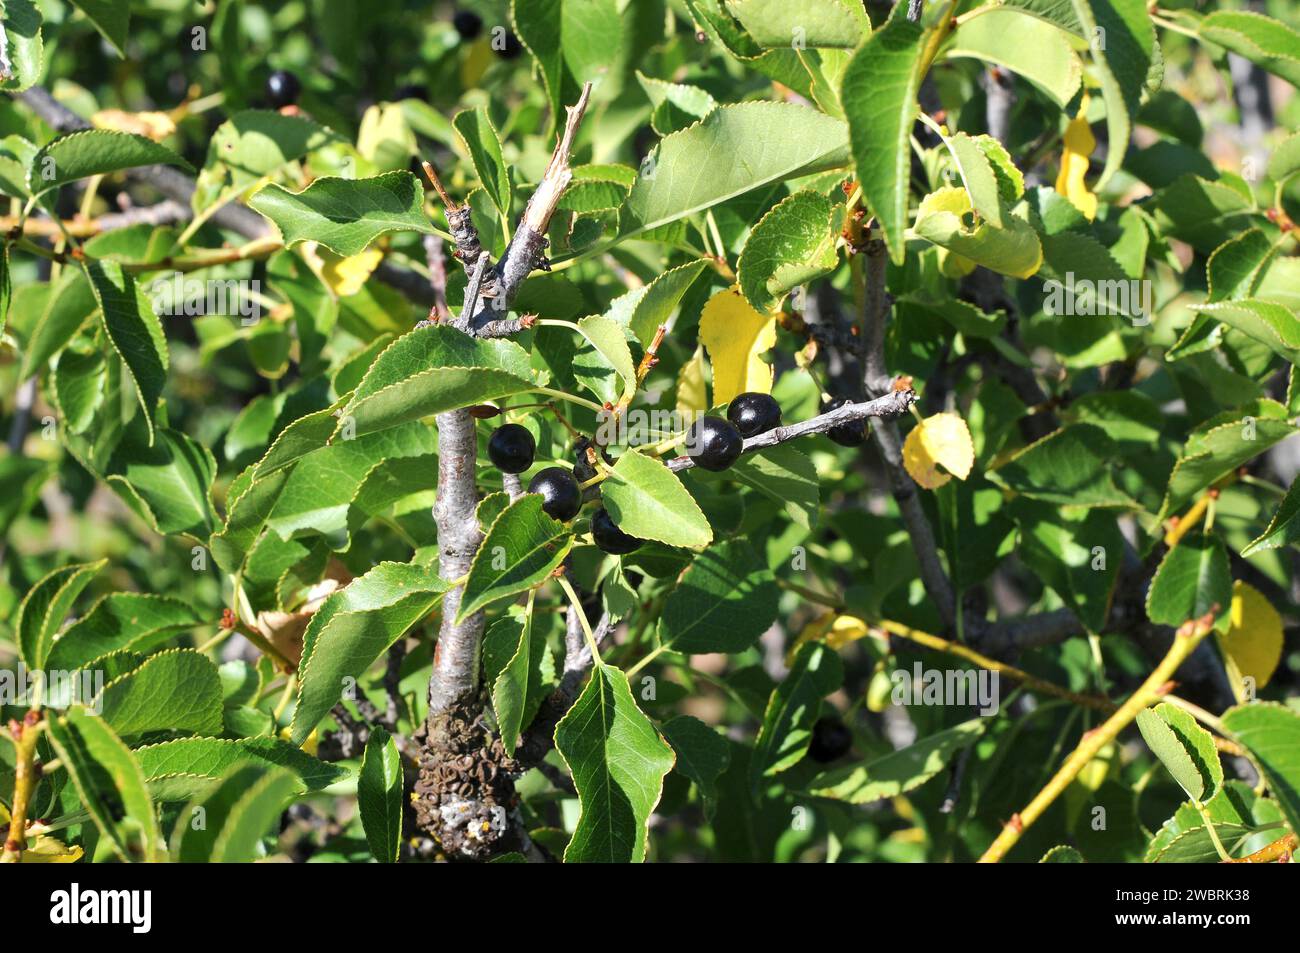 St. Lucie cherry (Prunus mahaleb) is a deciduous shrub or small tree native to Mediterranean Basin. Its seeds provide an essence used for cooking. Mat Stock Photo